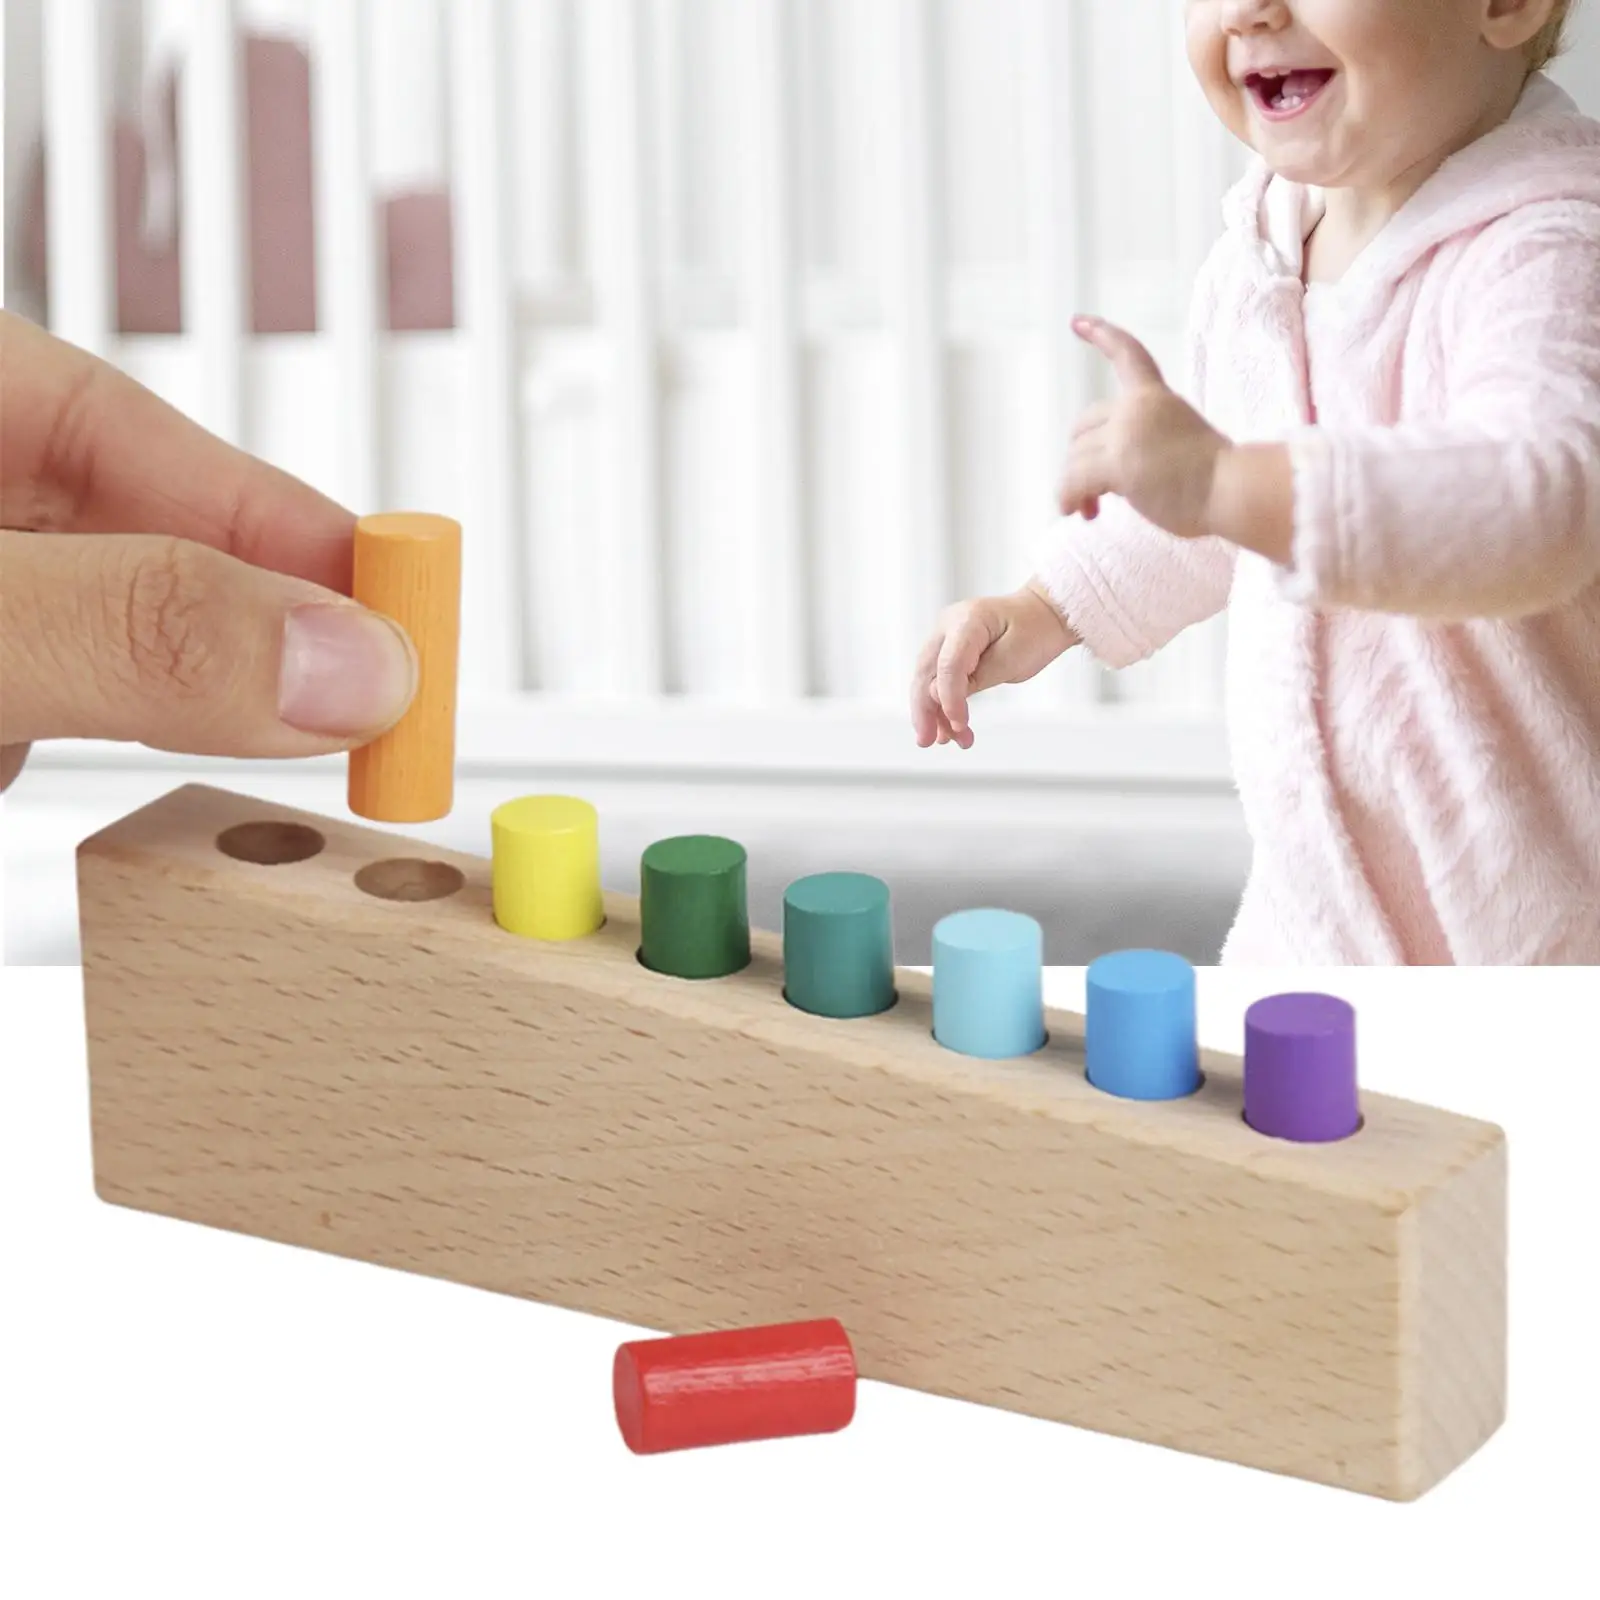 

Montessori Wooden Sticks Toys Wood Educational Toy, Portable, Travel Game Sensory Toys Learning Activities for Children Kids